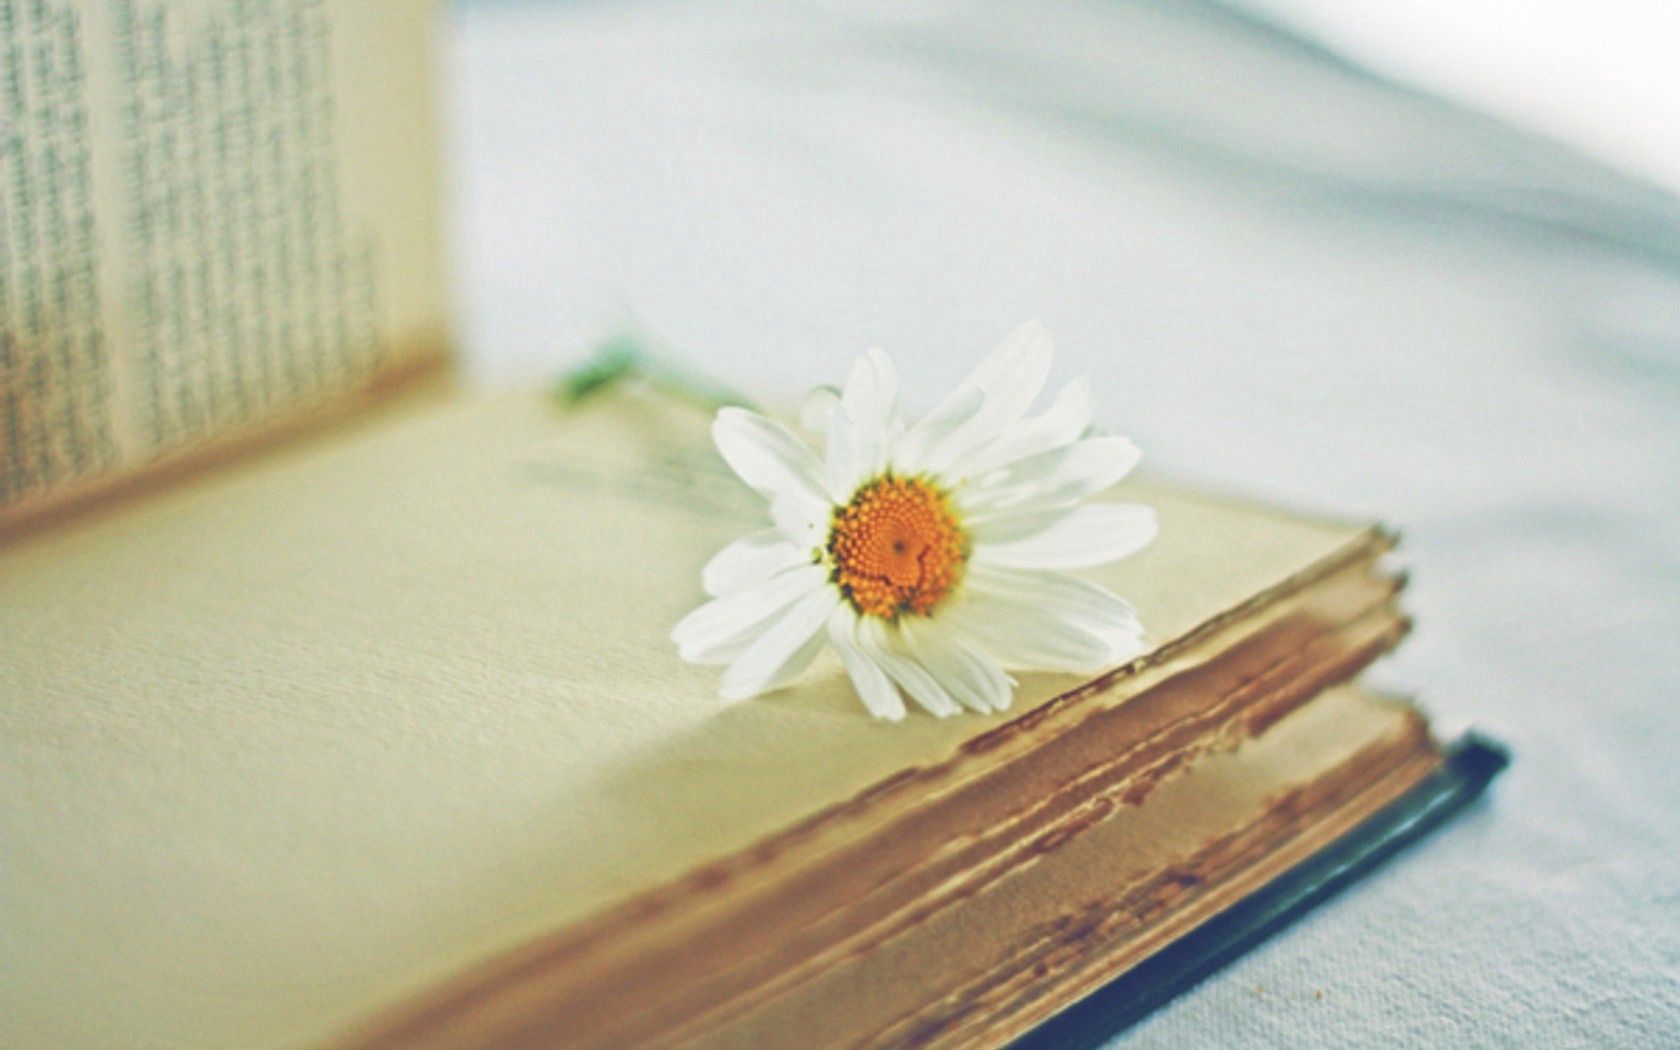 flowers, camomile, flower, blur, smooth, book, chamomile, pages, page